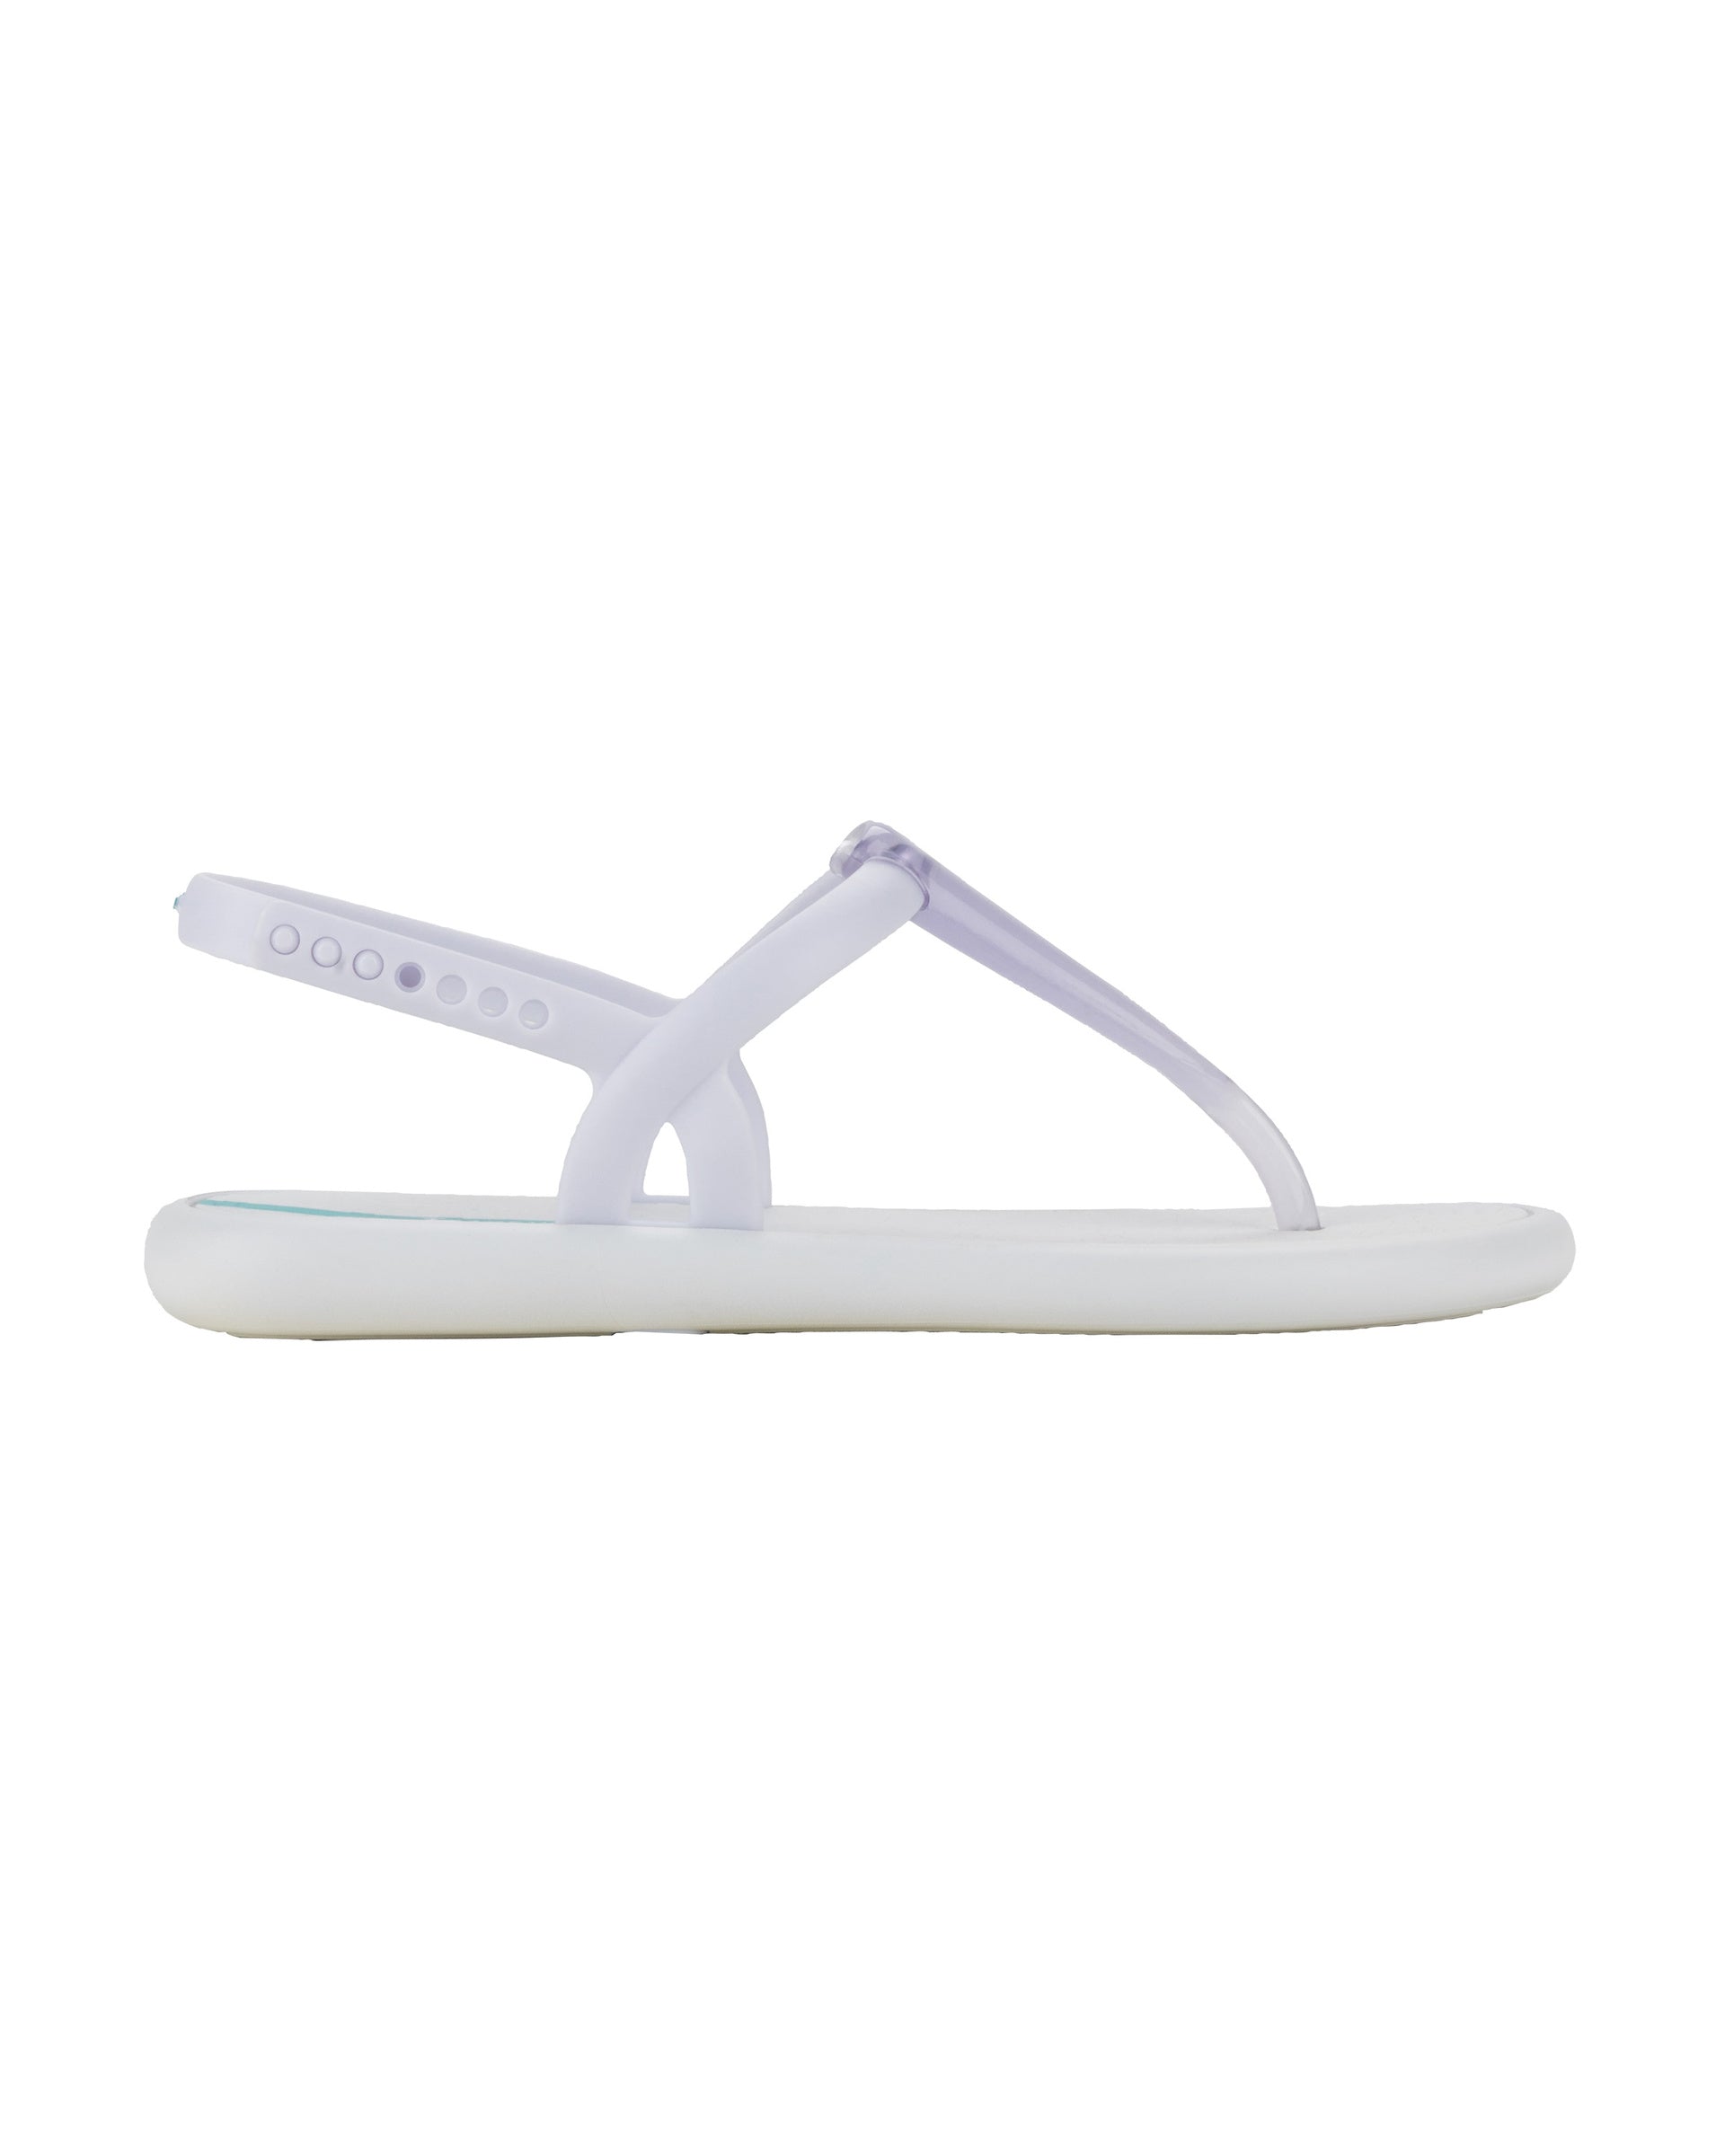 Outer side view of a white Ipanema Glossy women's t-strap sandal.